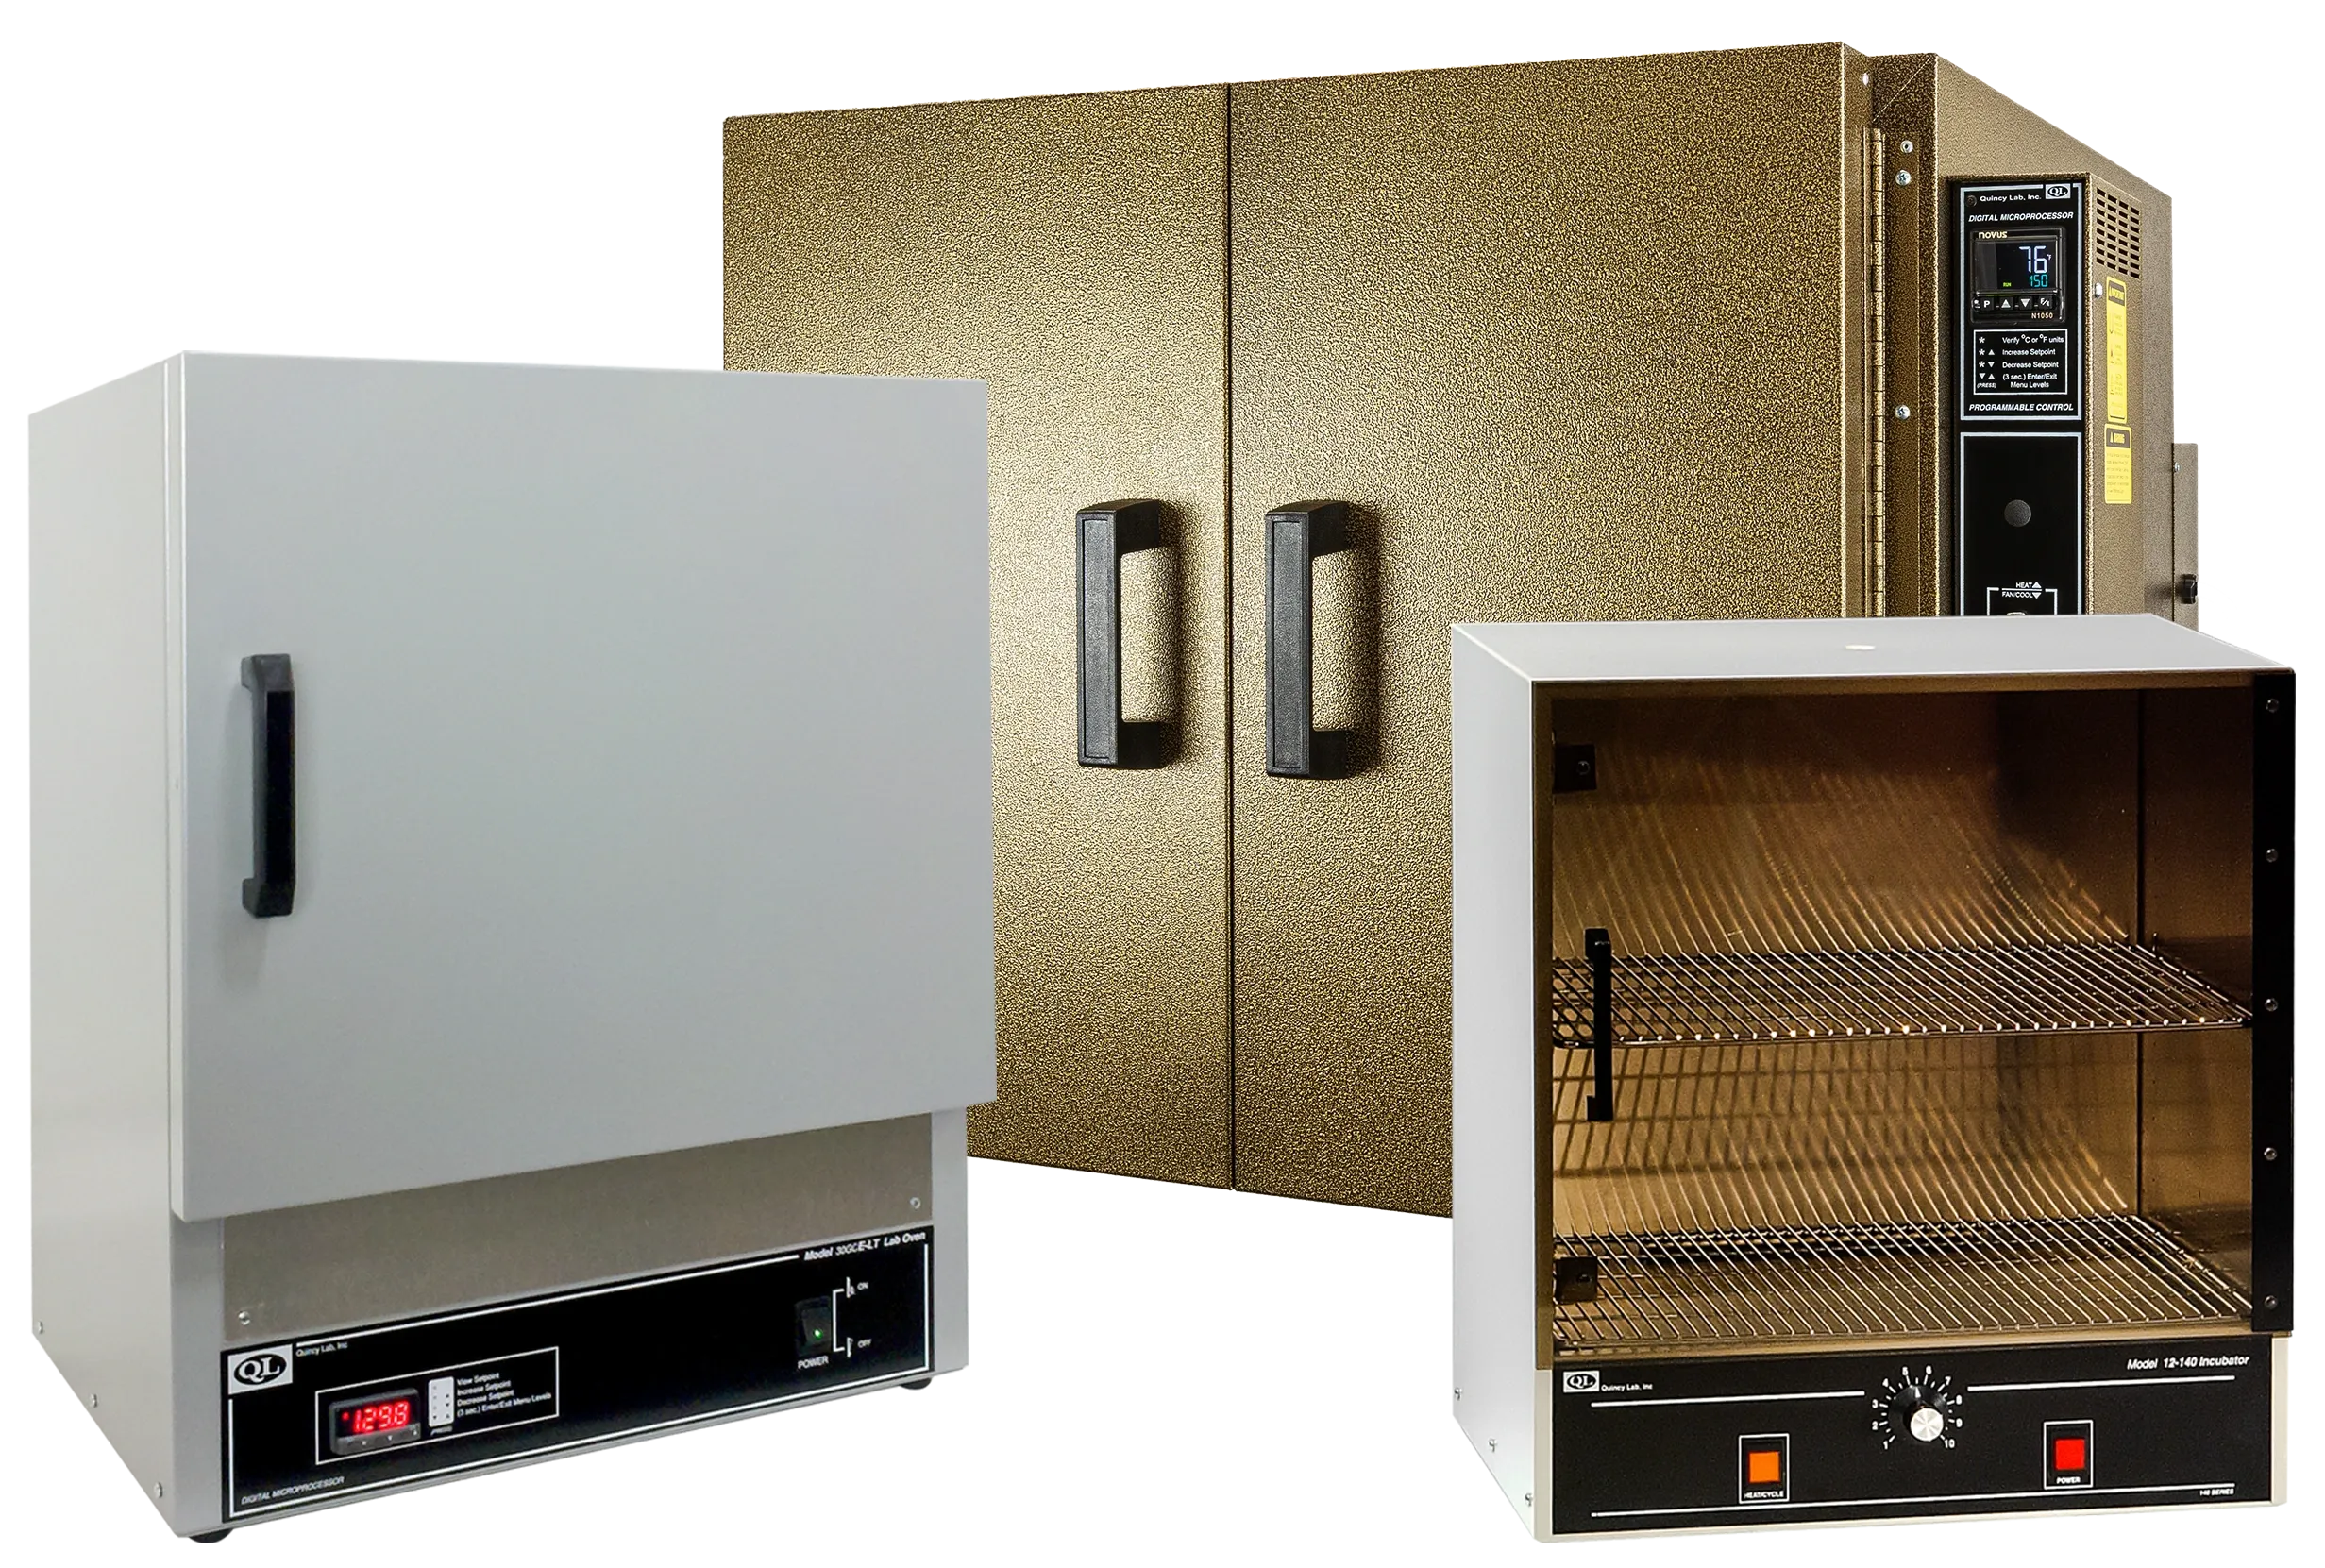 Lab oven with wide temperature range